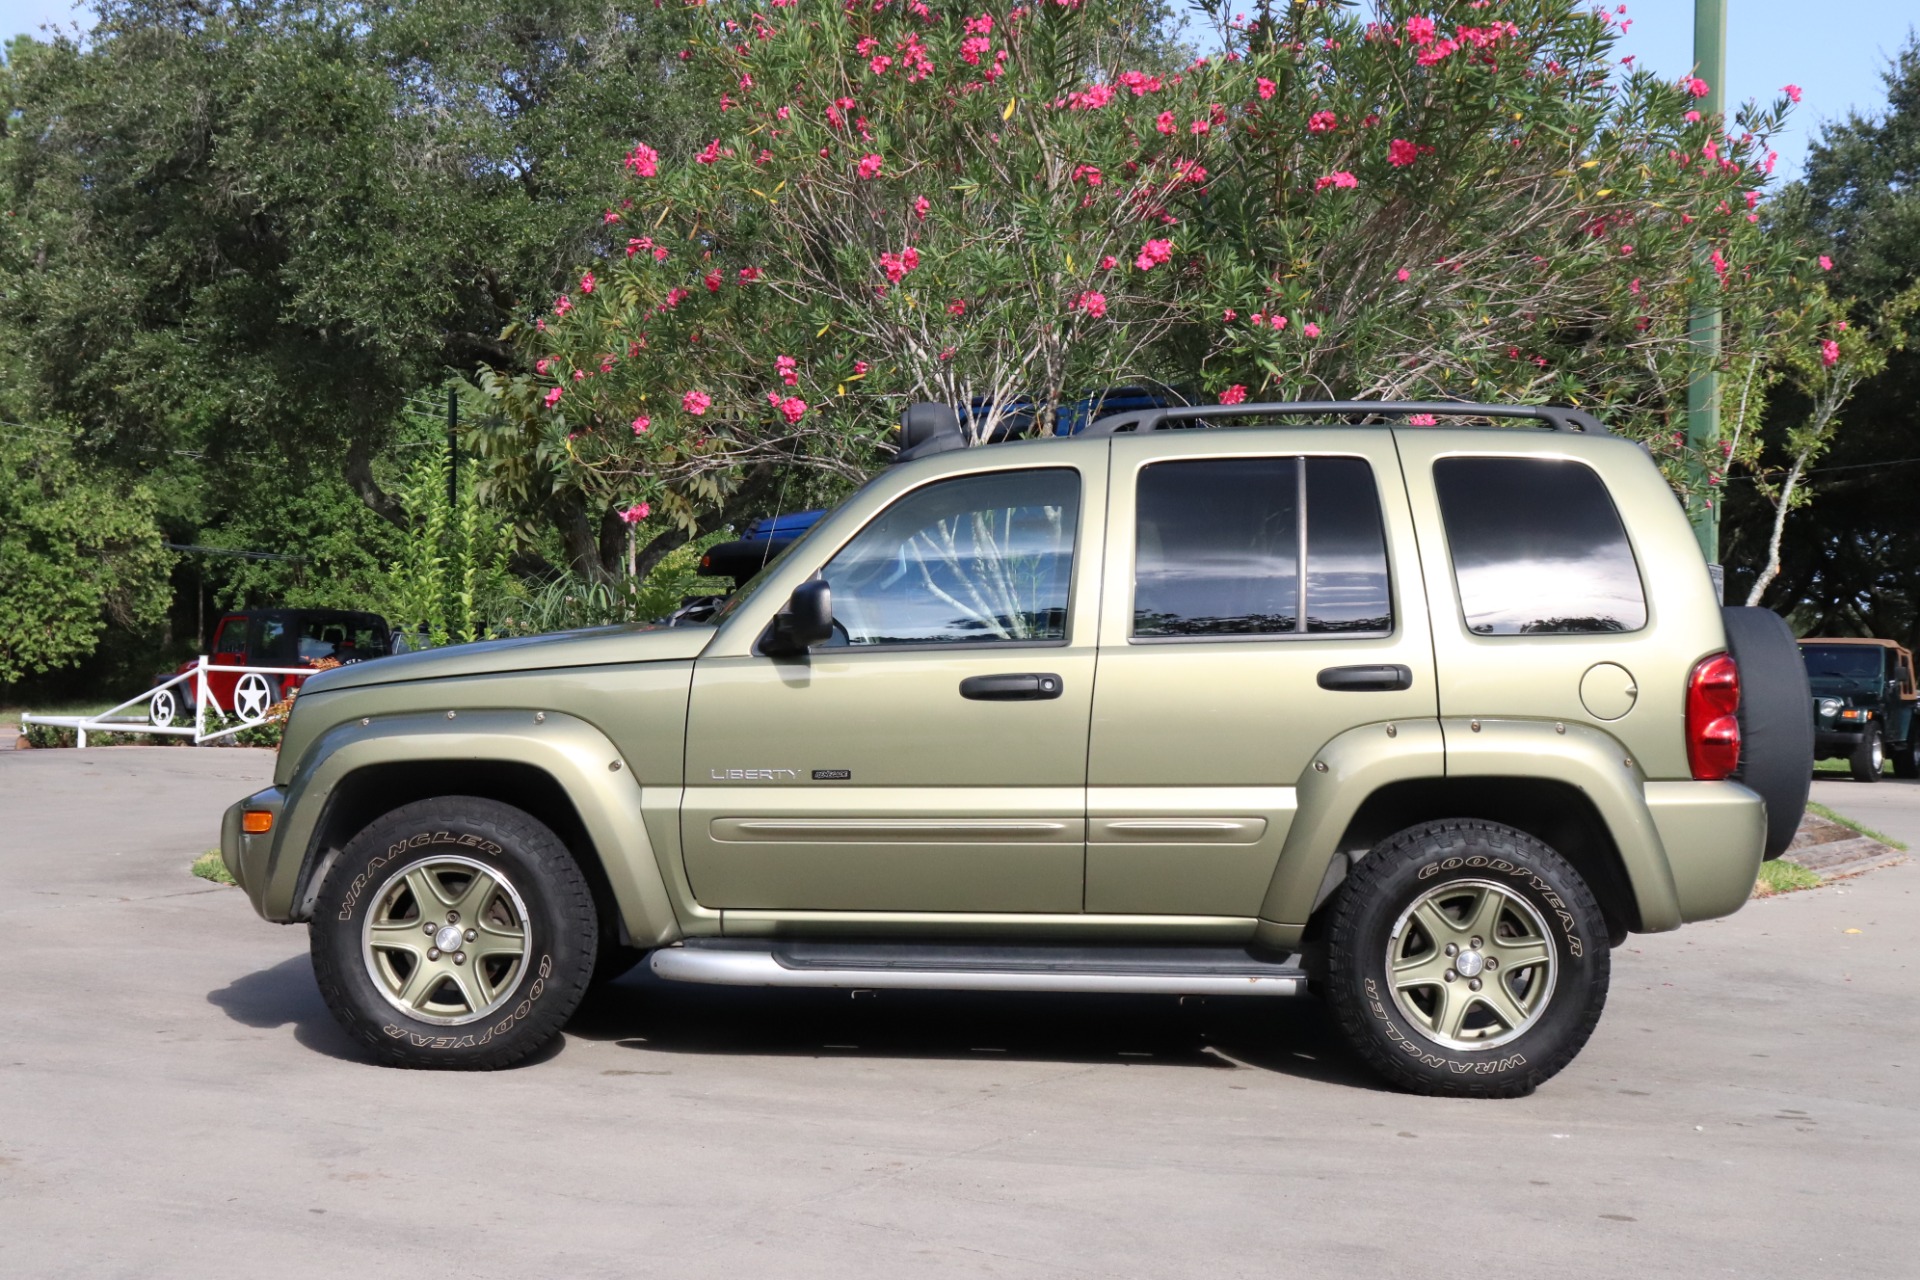 Used 2003 Jeep Liberty 4dr Renegade 4WD For Sale (6,995